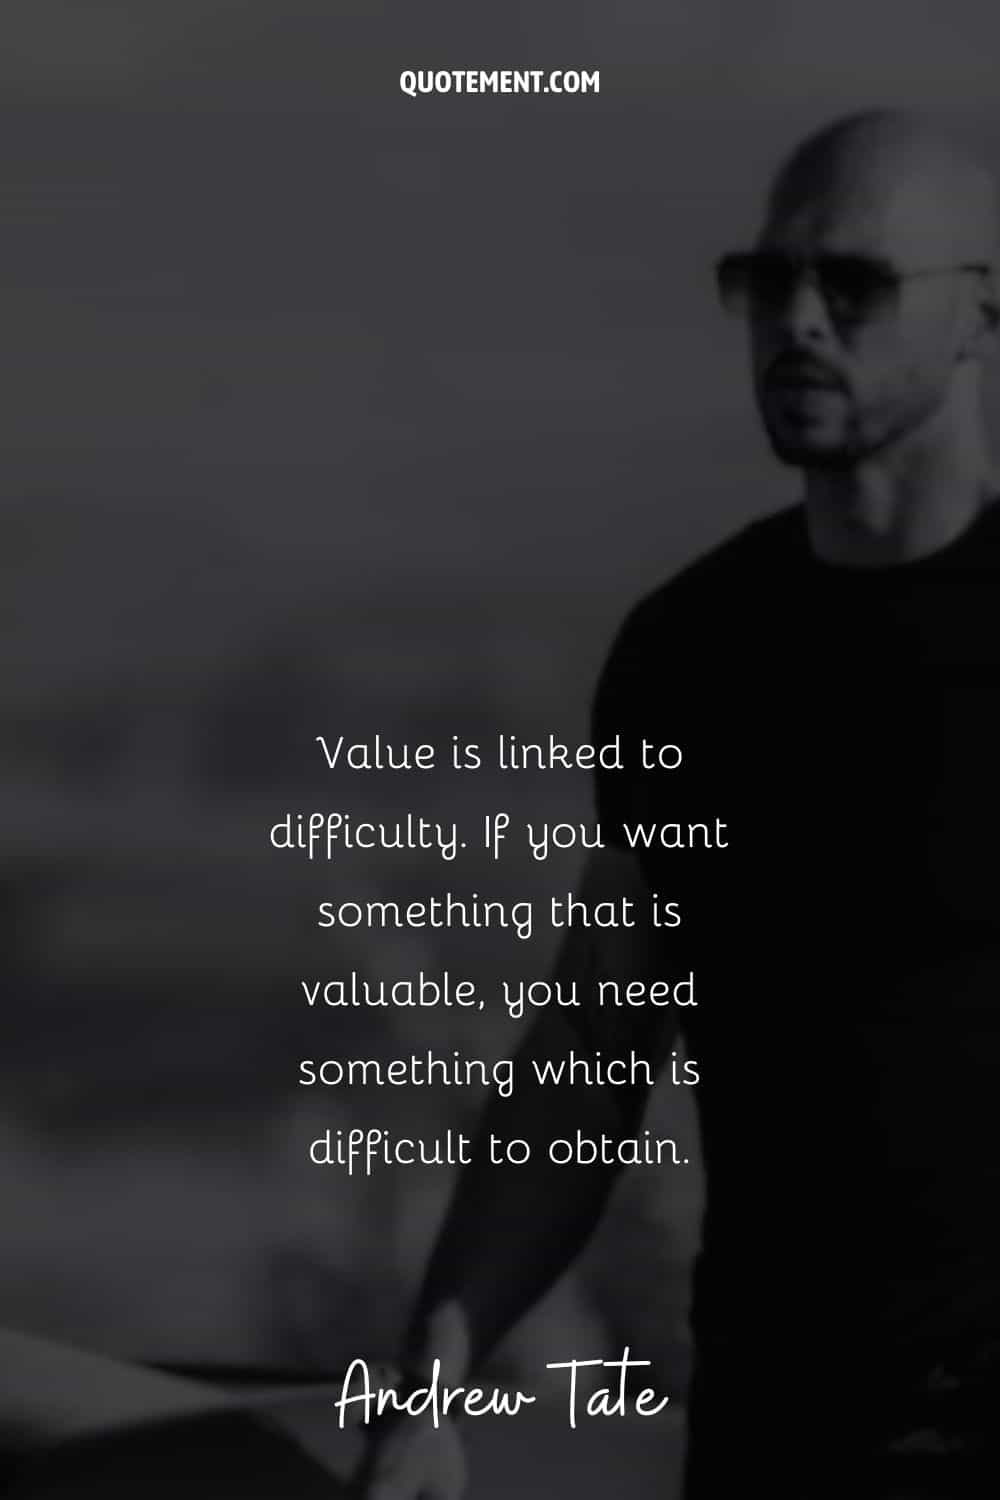 Value is linked to difficulty